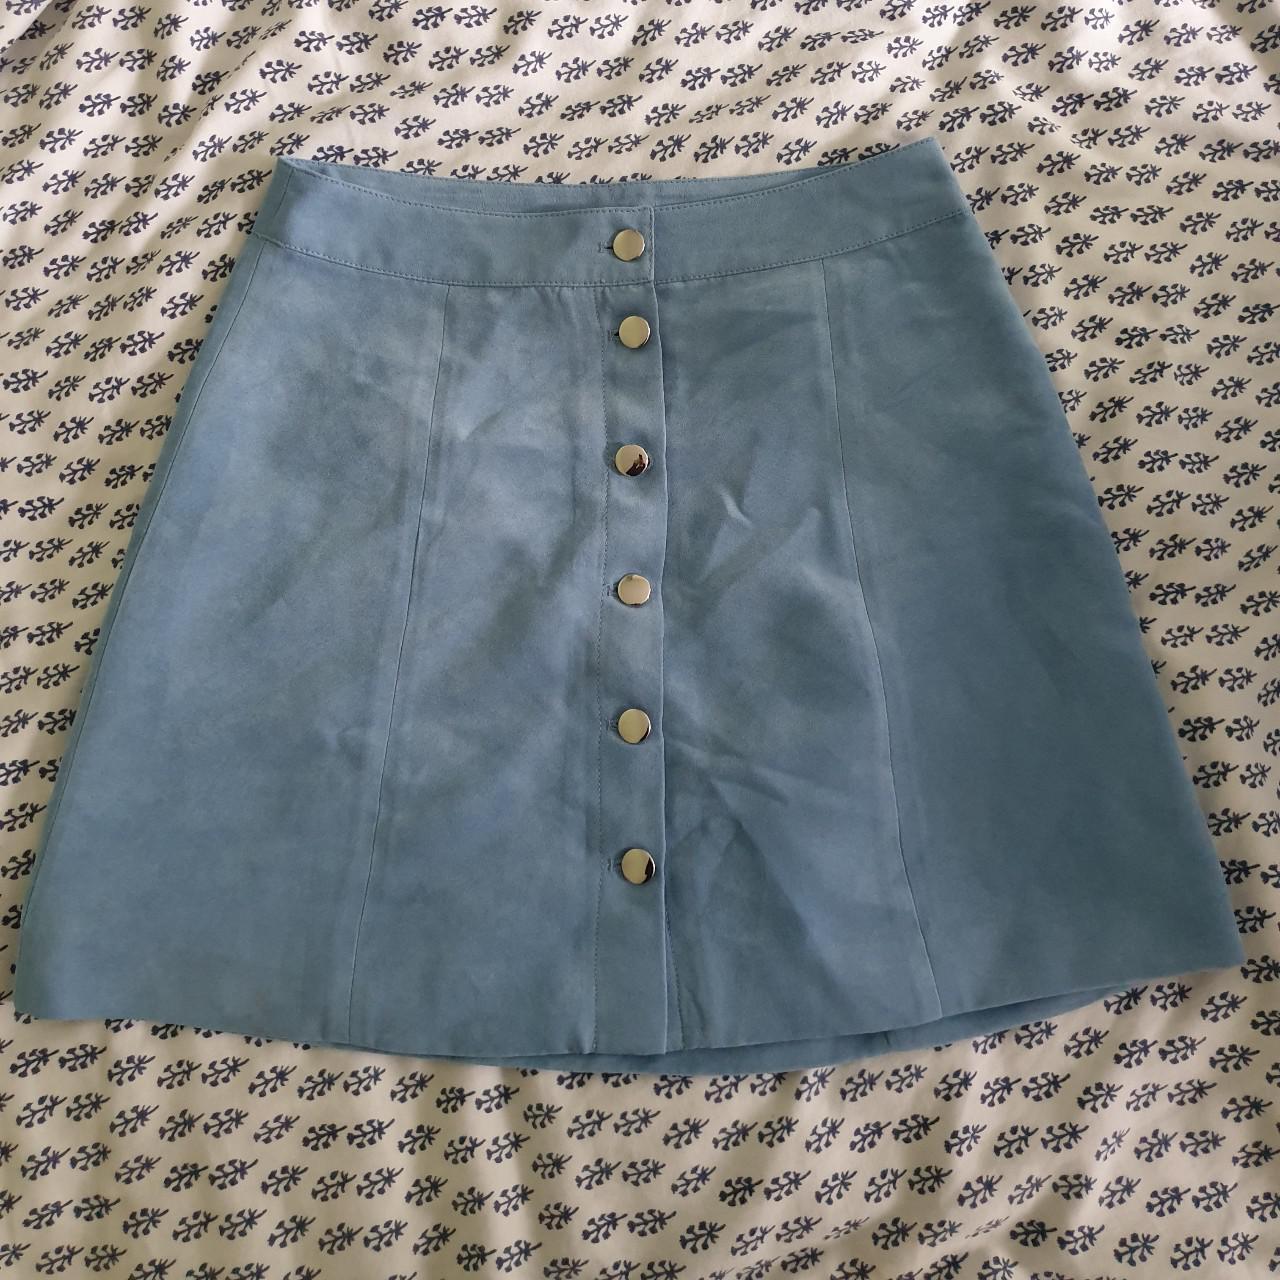 Product Image 2 - BNWT H&M suede mini skirt